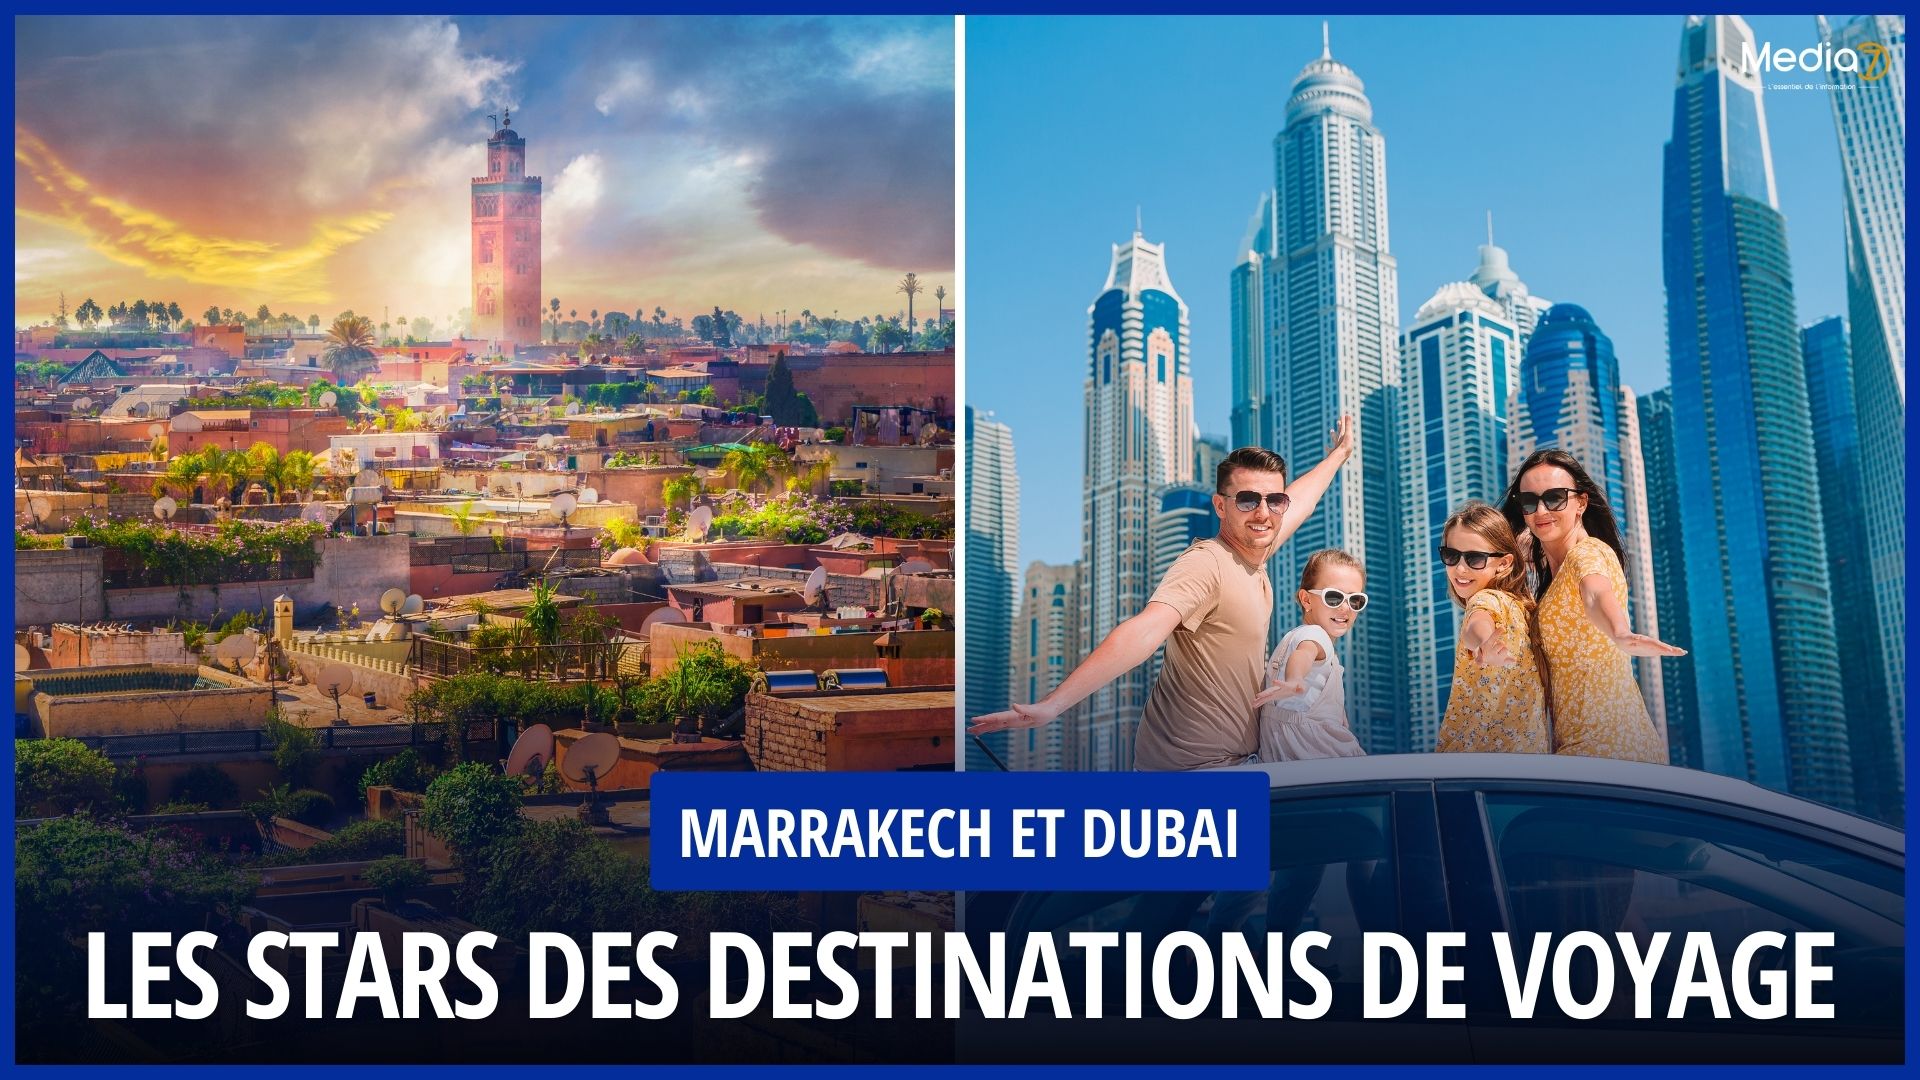 Marrakech and Dubai among the Best Travel Destinations in the World